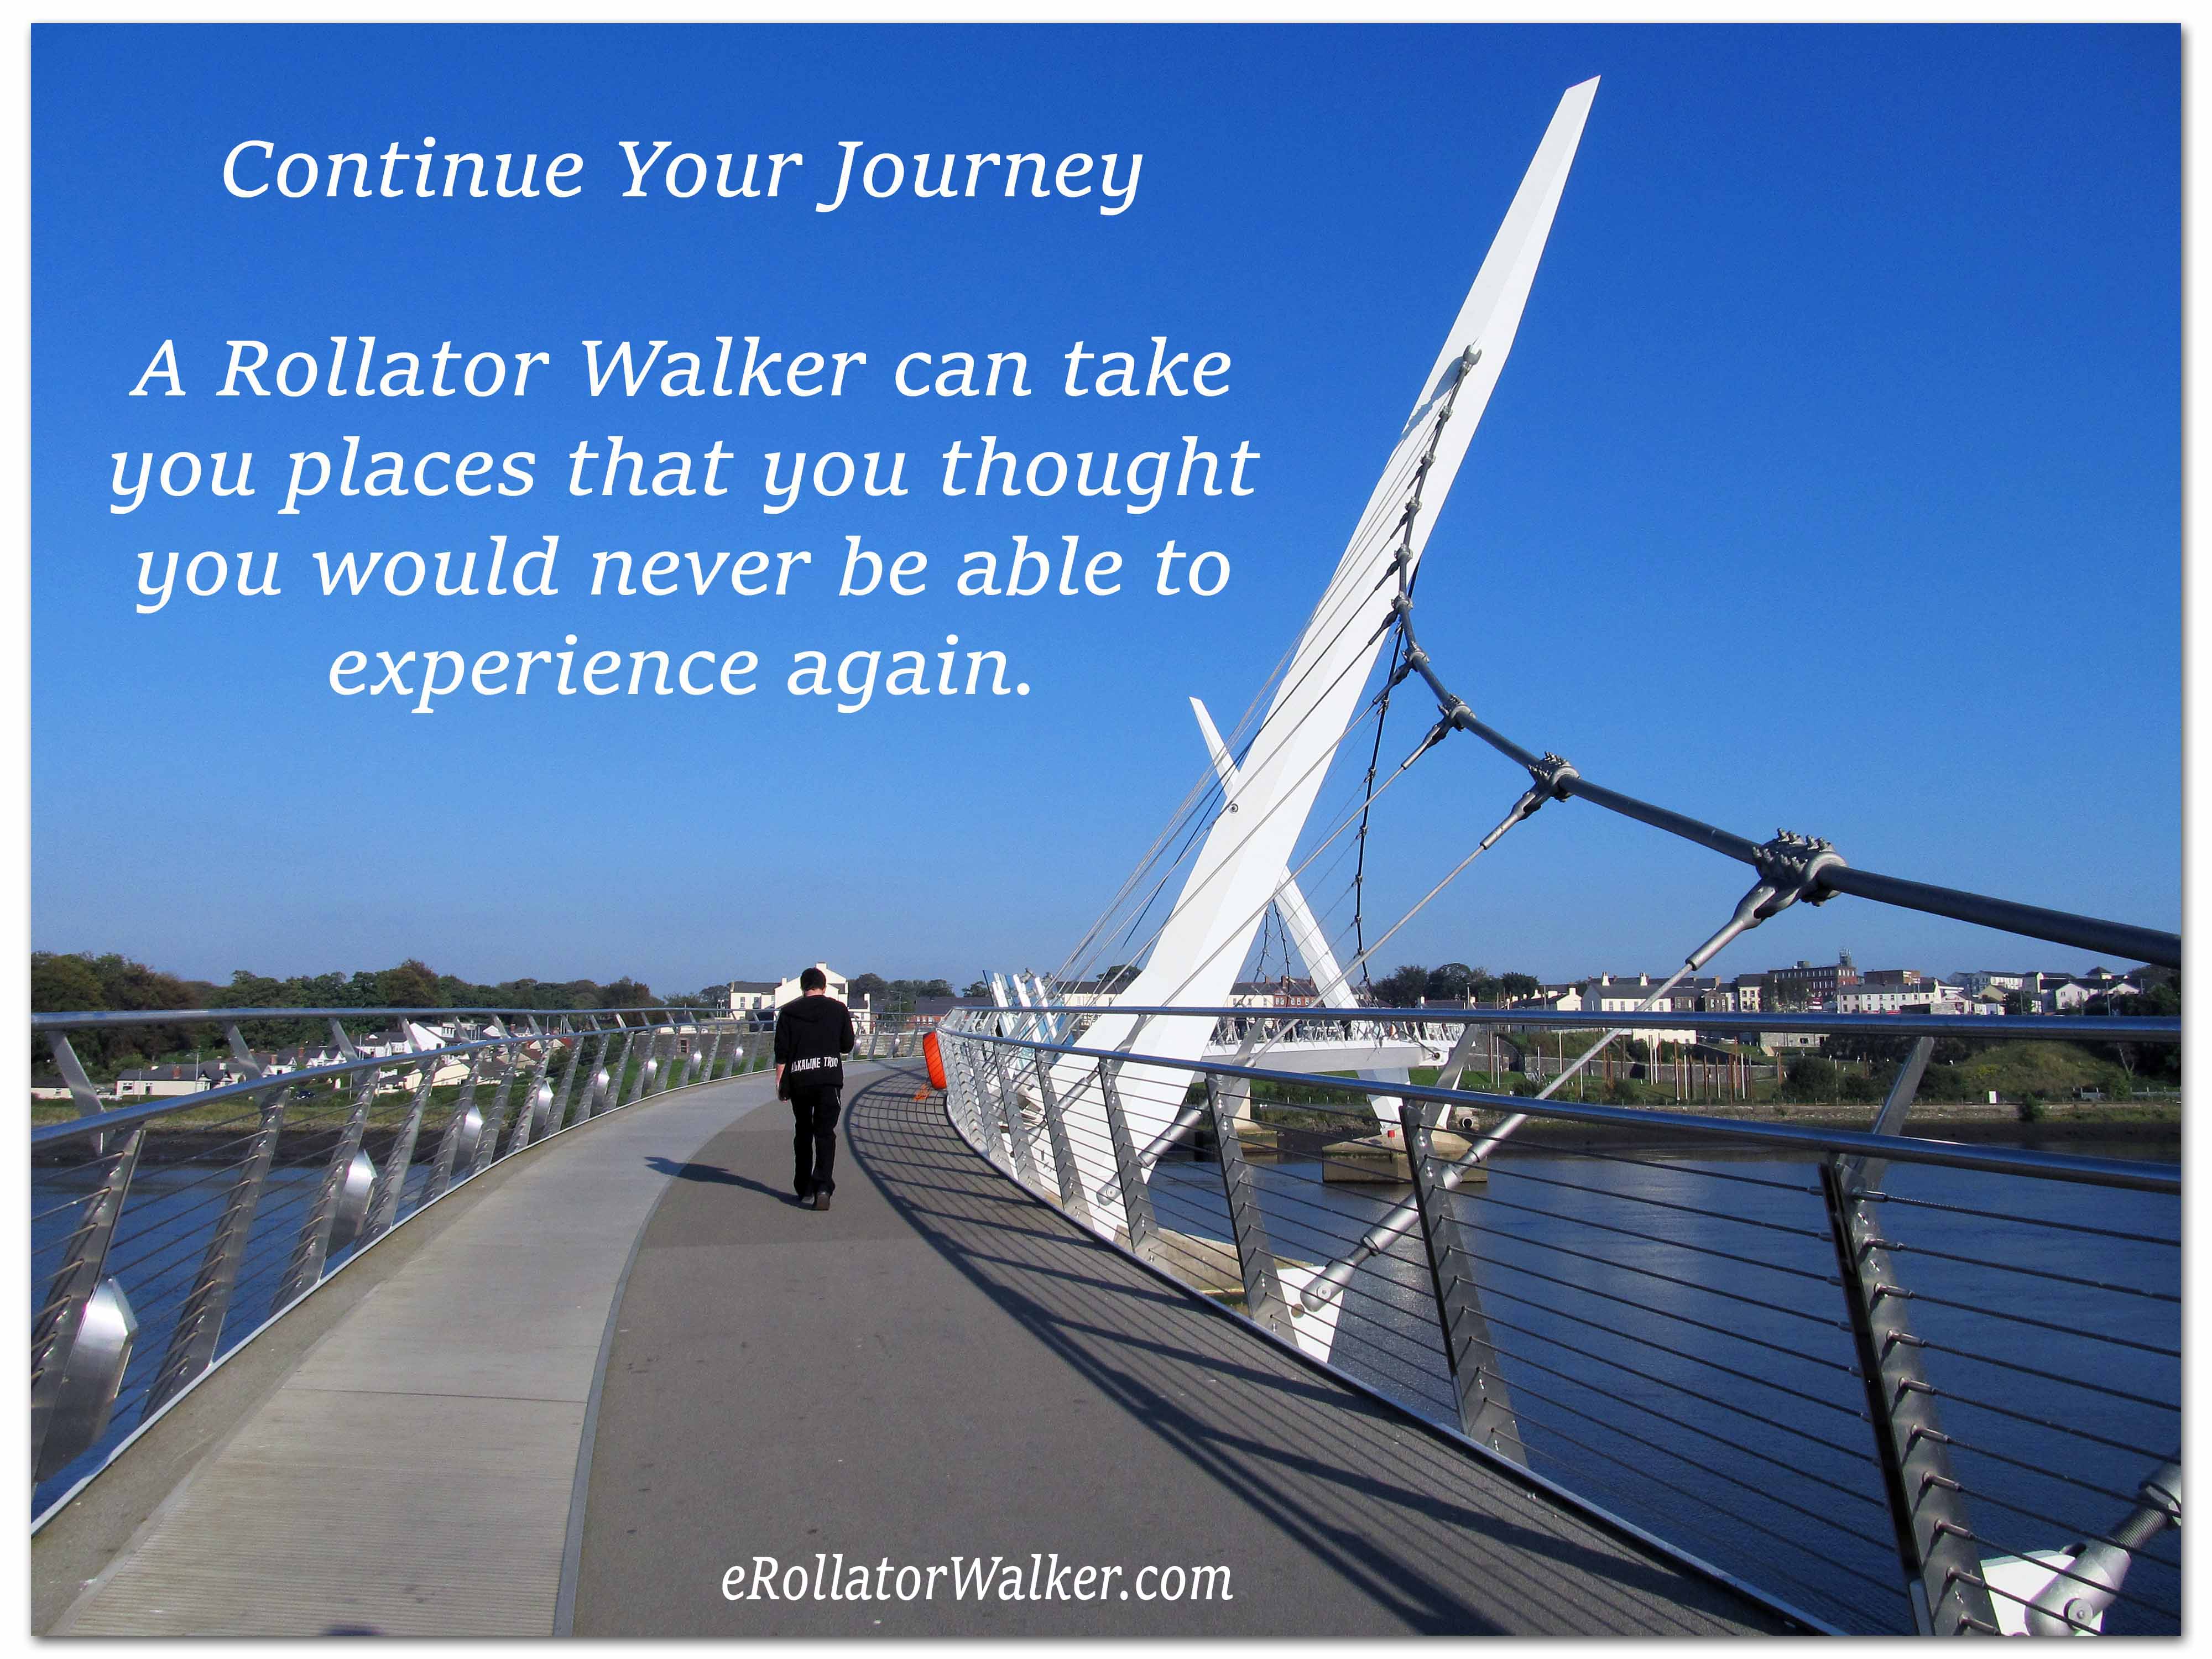 Travel with a Rollator Walker